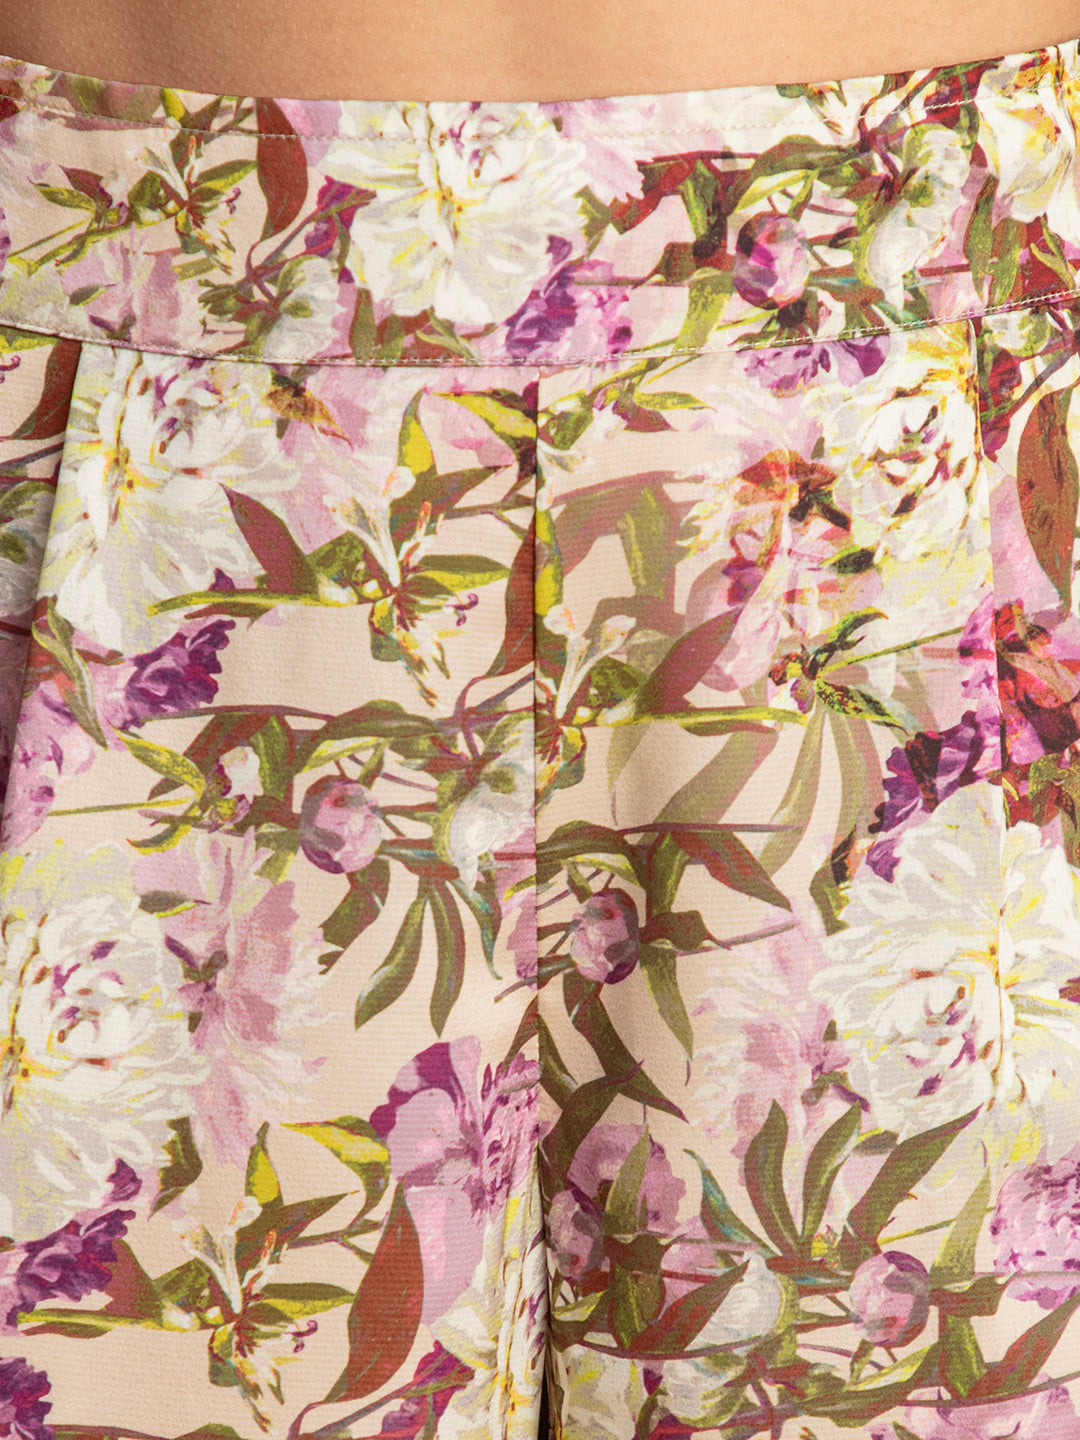 Purple Mariana Floral Printed Satin Co-ords